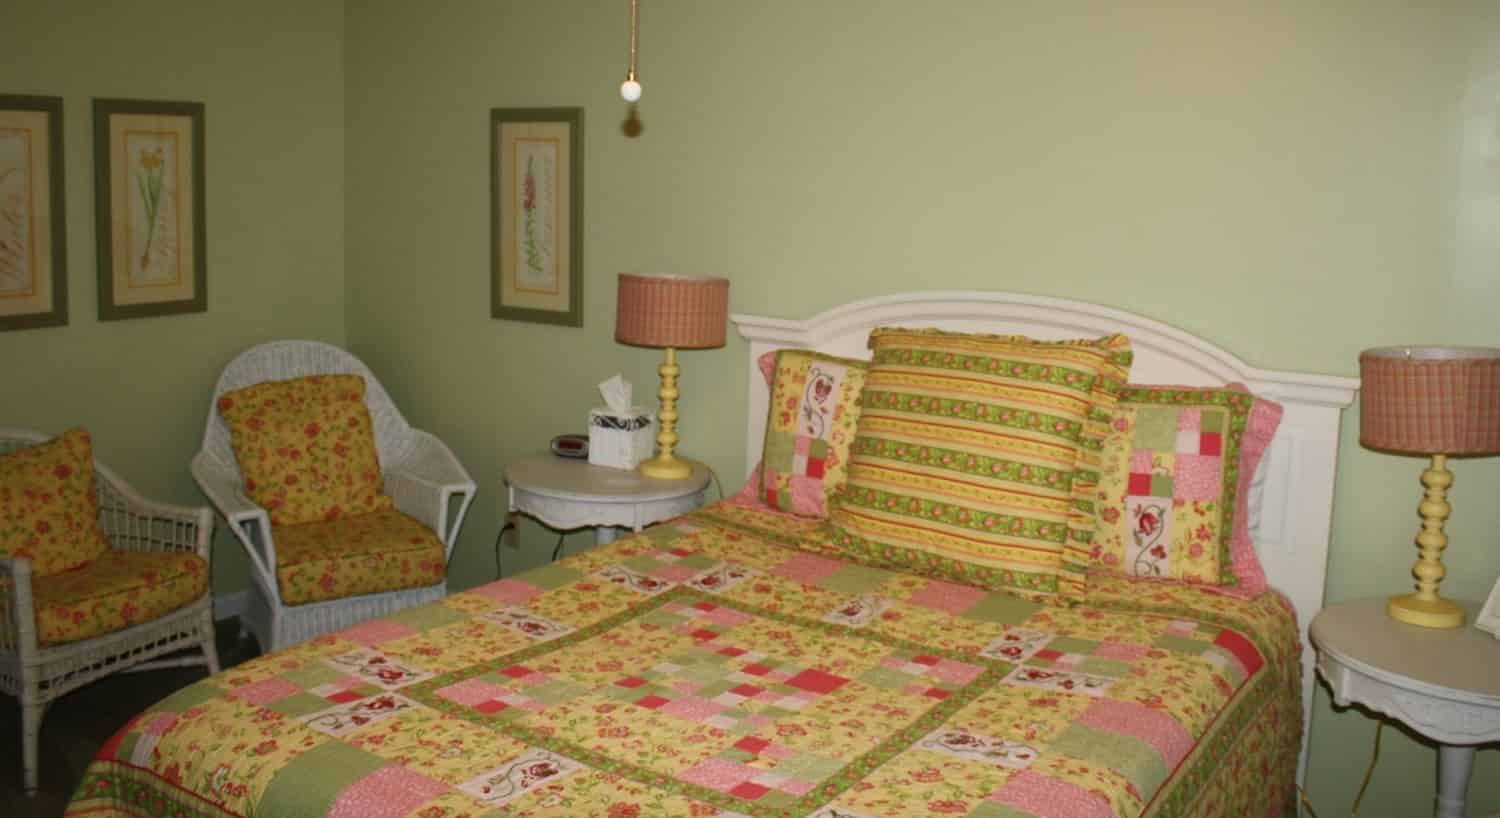 Bedroom painted light green with white headboard and green, yellow, and pink bedding and white wicker chairs